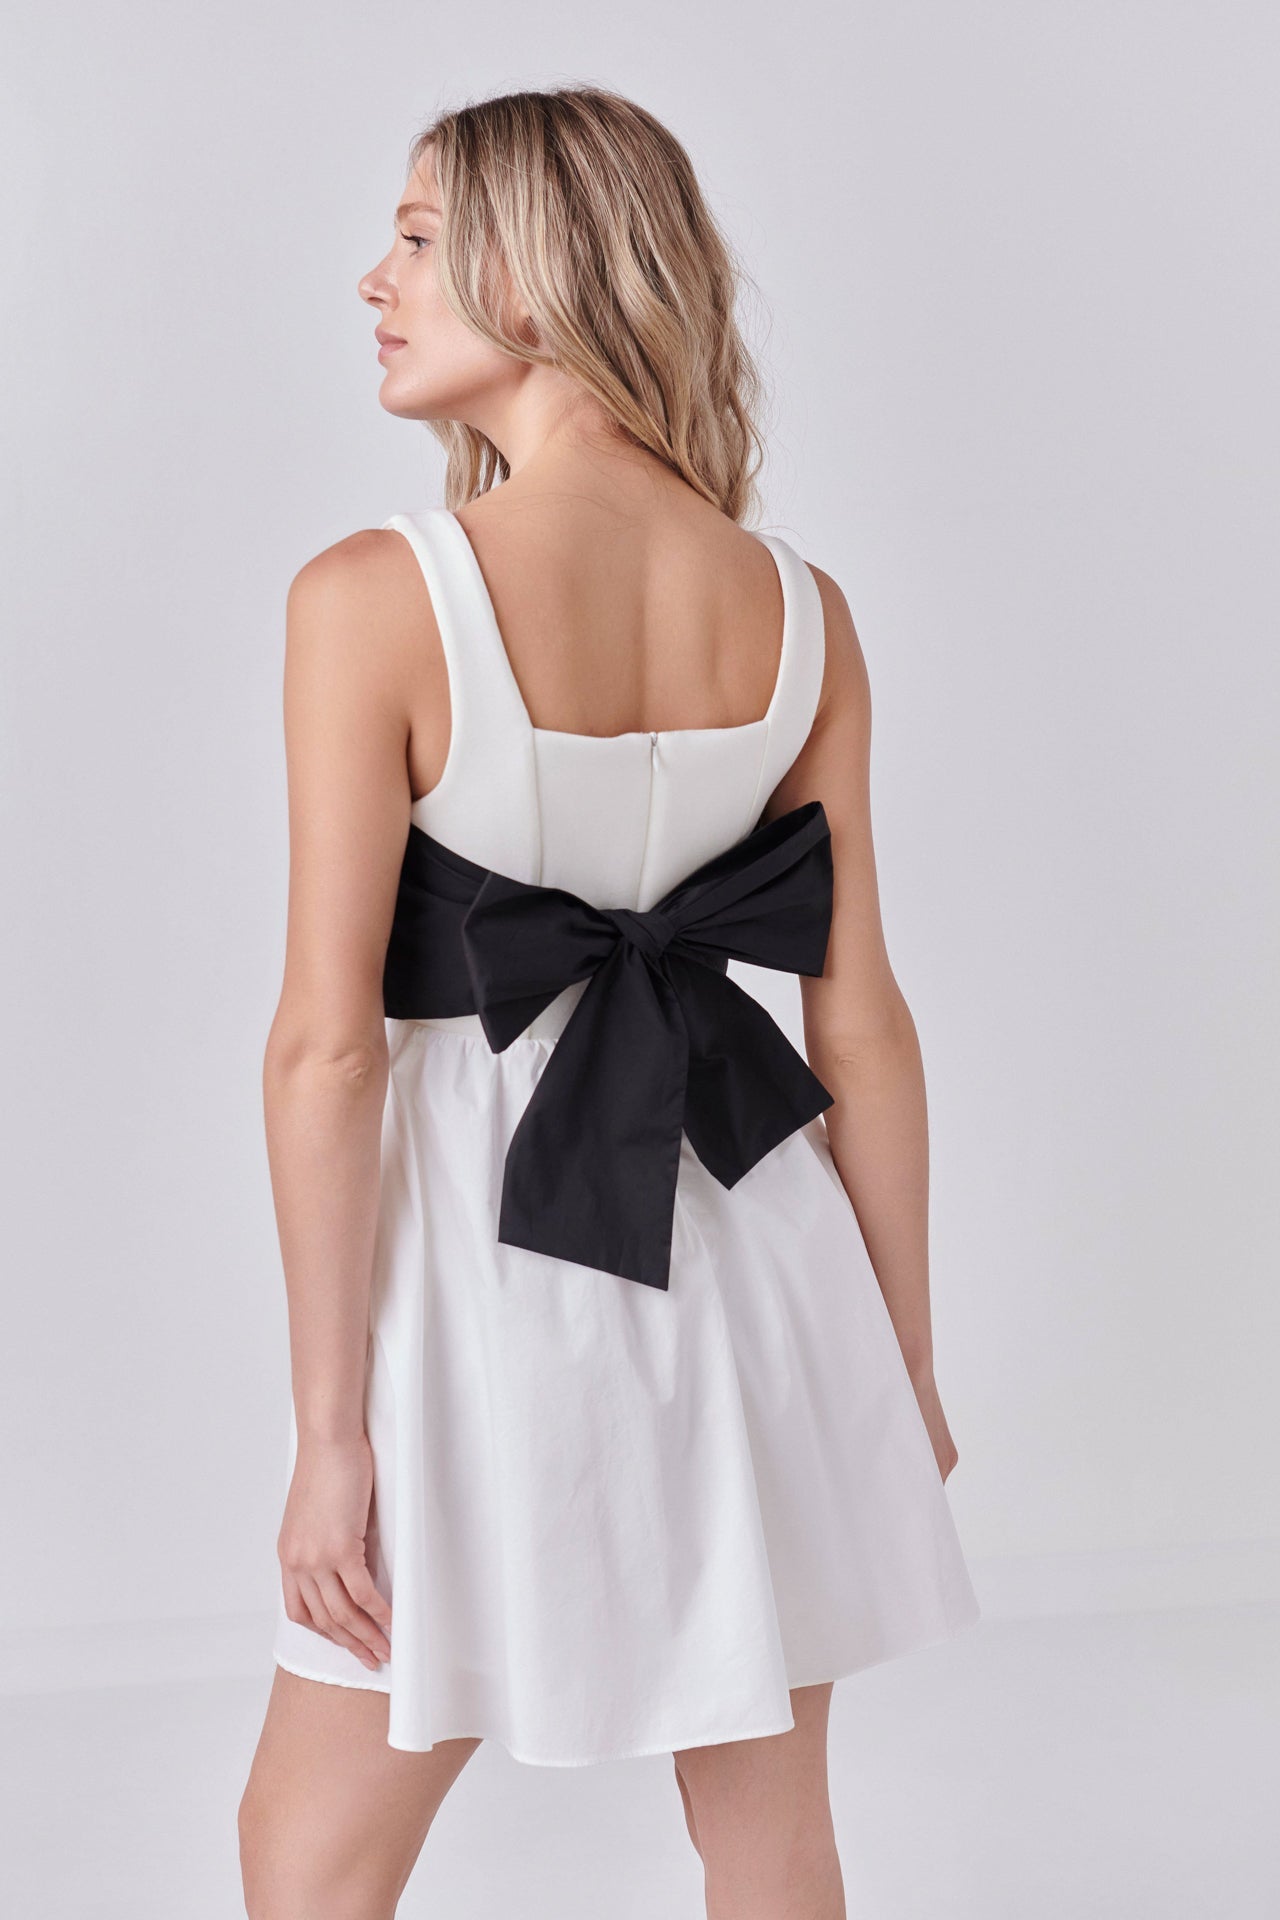 Endless Rose - Back Bow Contrast Dress - Dresses in Women's Clothing available at endlessrose.com